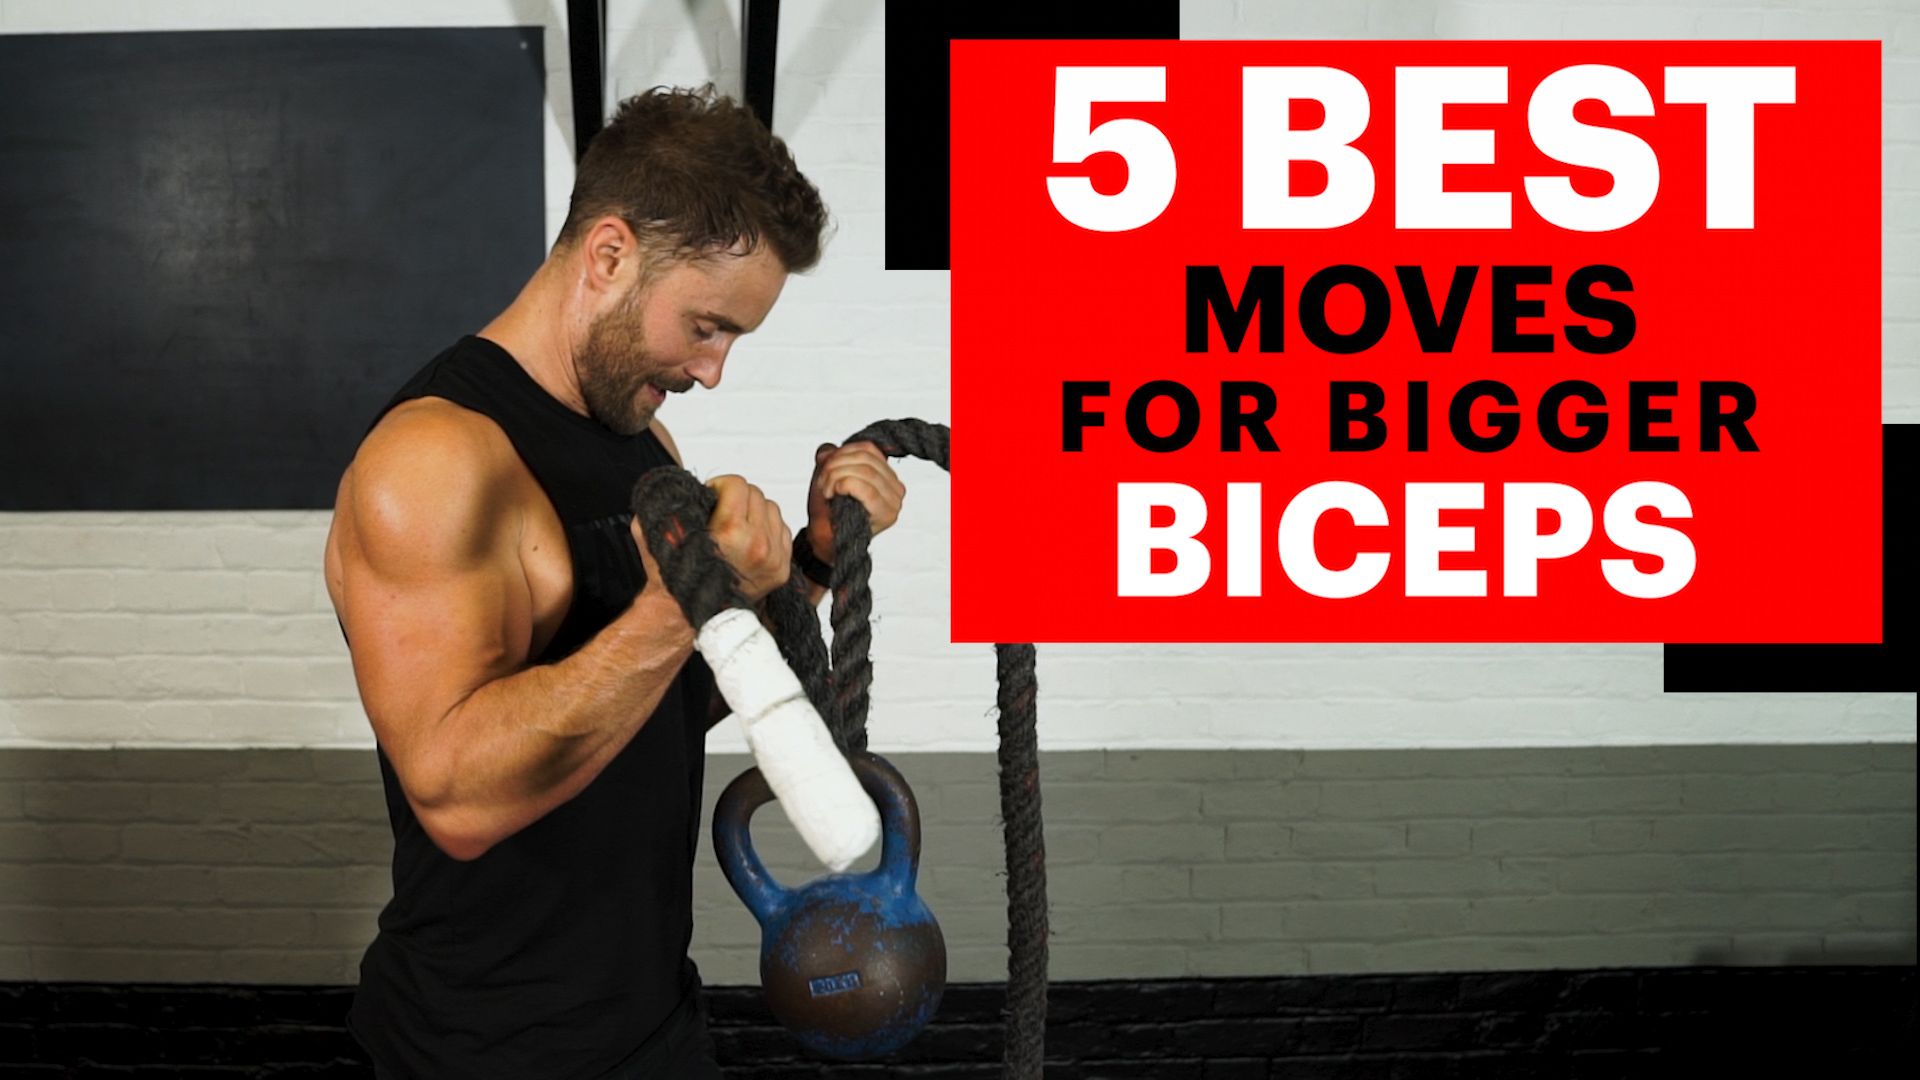 Bigger Arms  7 Secrets Of Bigger Biceps From The Pros